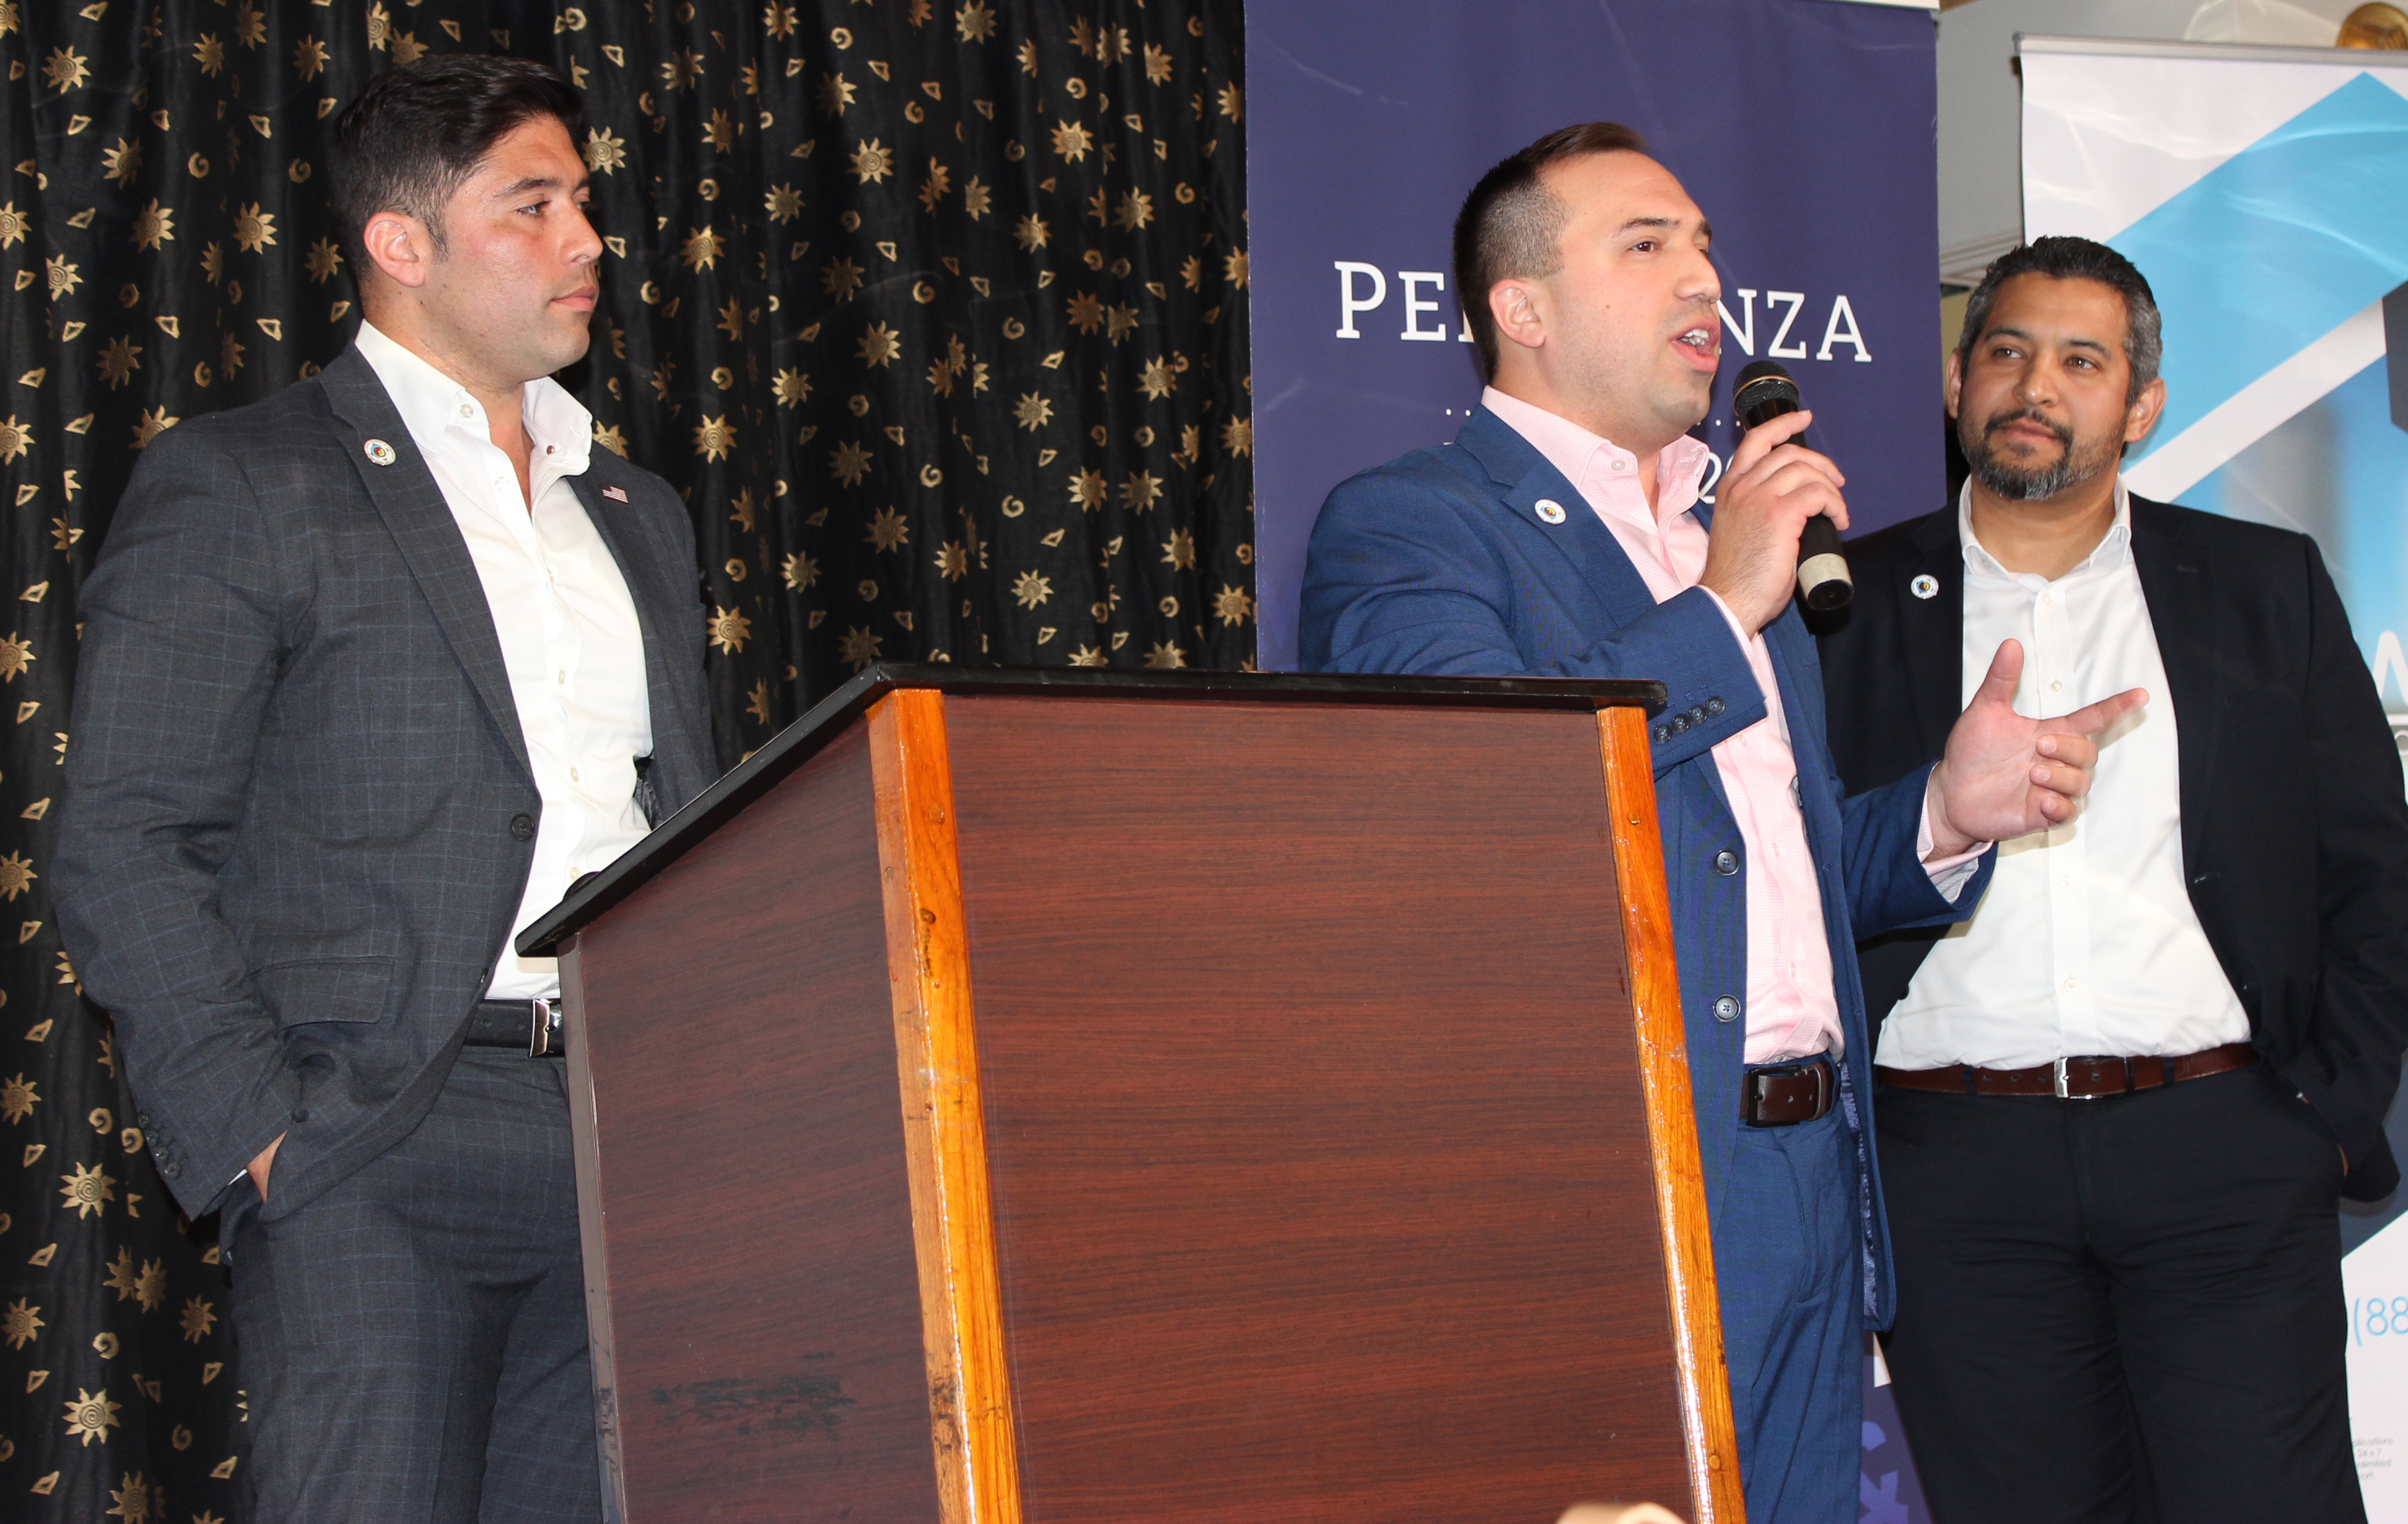 Doral Chamber of Commerce Carnival Cruise Luncheon 2019, Networking Event in Miami, Florida. PereGonza Law Group talking on stage, Juan Perez.